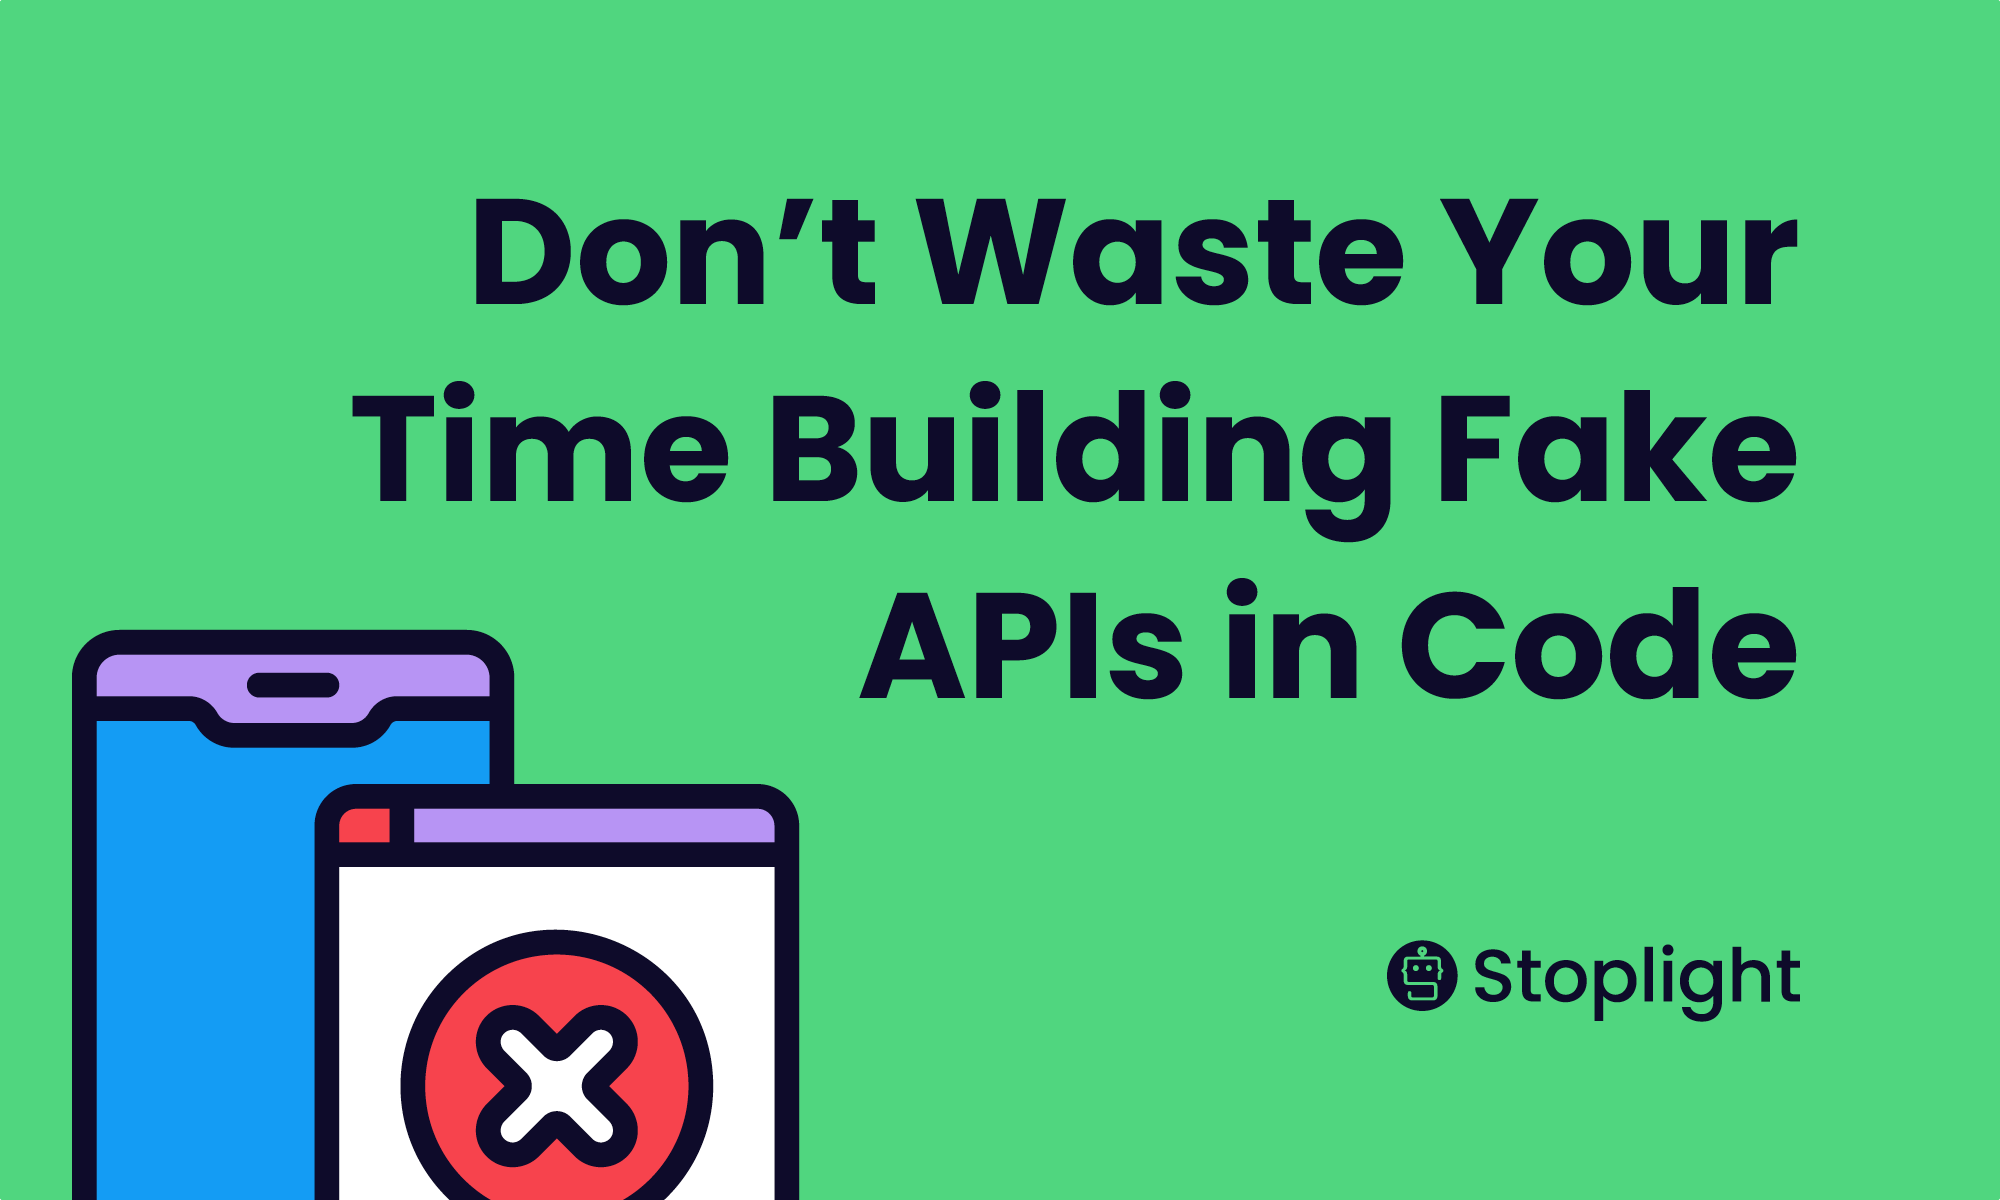 Don’t Waste Your Time Building Fake APIs in Code